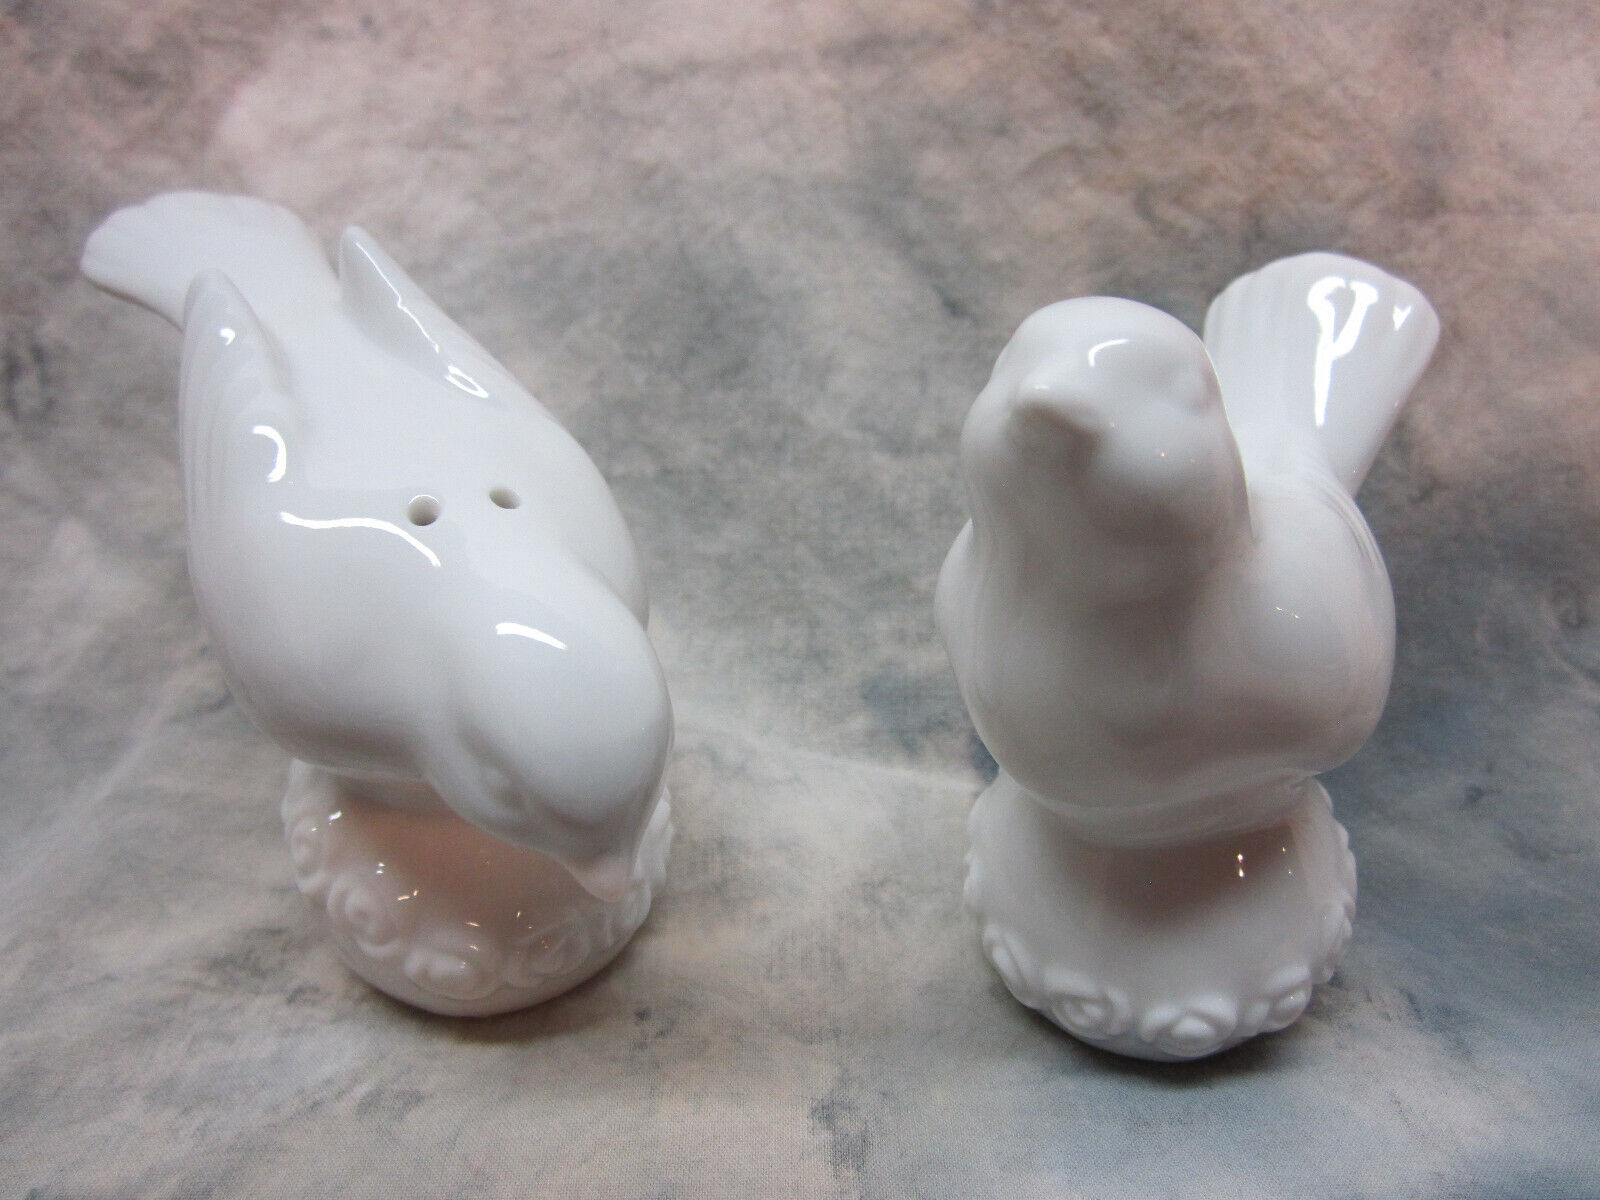 Collectible White Ceramic Songbird Salt & Pepper Shakers w/Glossy Glaze